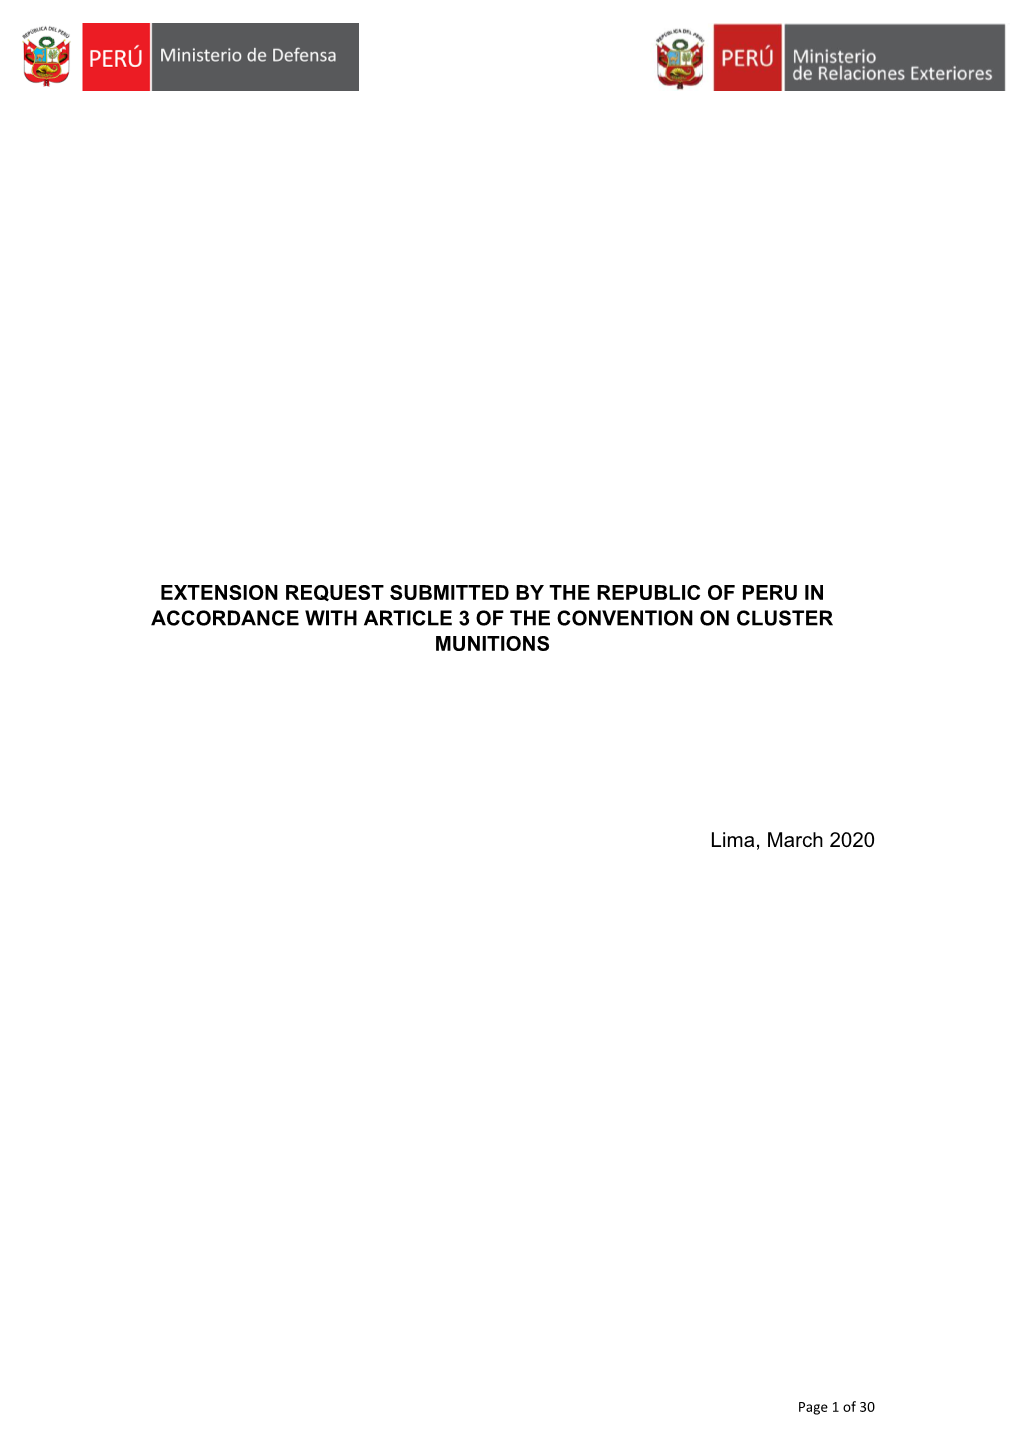 EXTENSION REQUEST SUBMITTED by the REPUBLIC of PERU in ACCORDANCE with ARTICLE 3 of the CONVENTION on CLUSTER MUNITIONS Lima, Ma